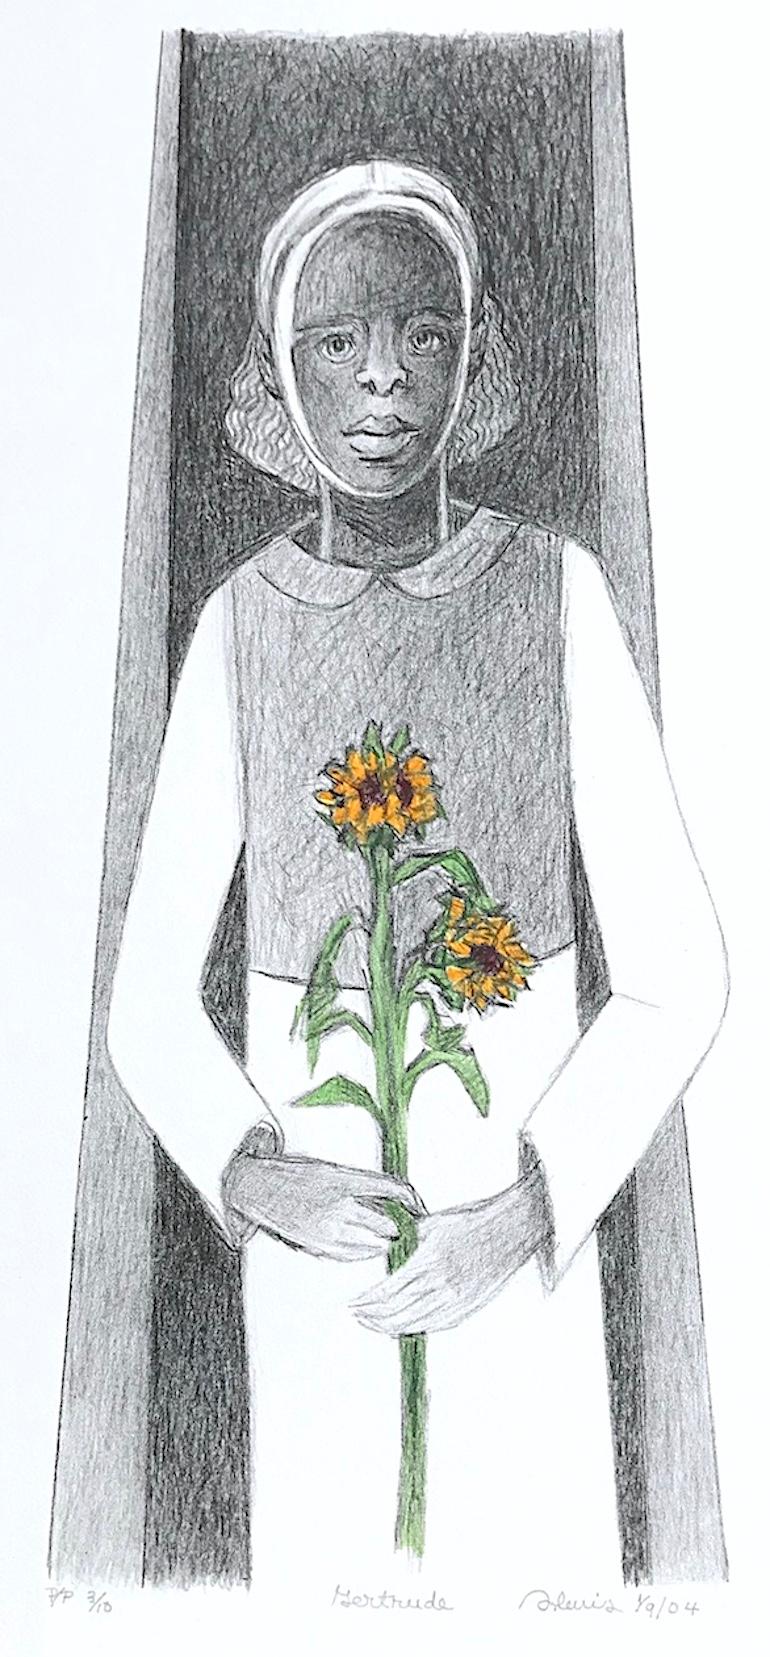 GERTRUDE Hand Drawn Lithograph, Young Black Girl Portrait, Sunflower - Print by Samella Lewis